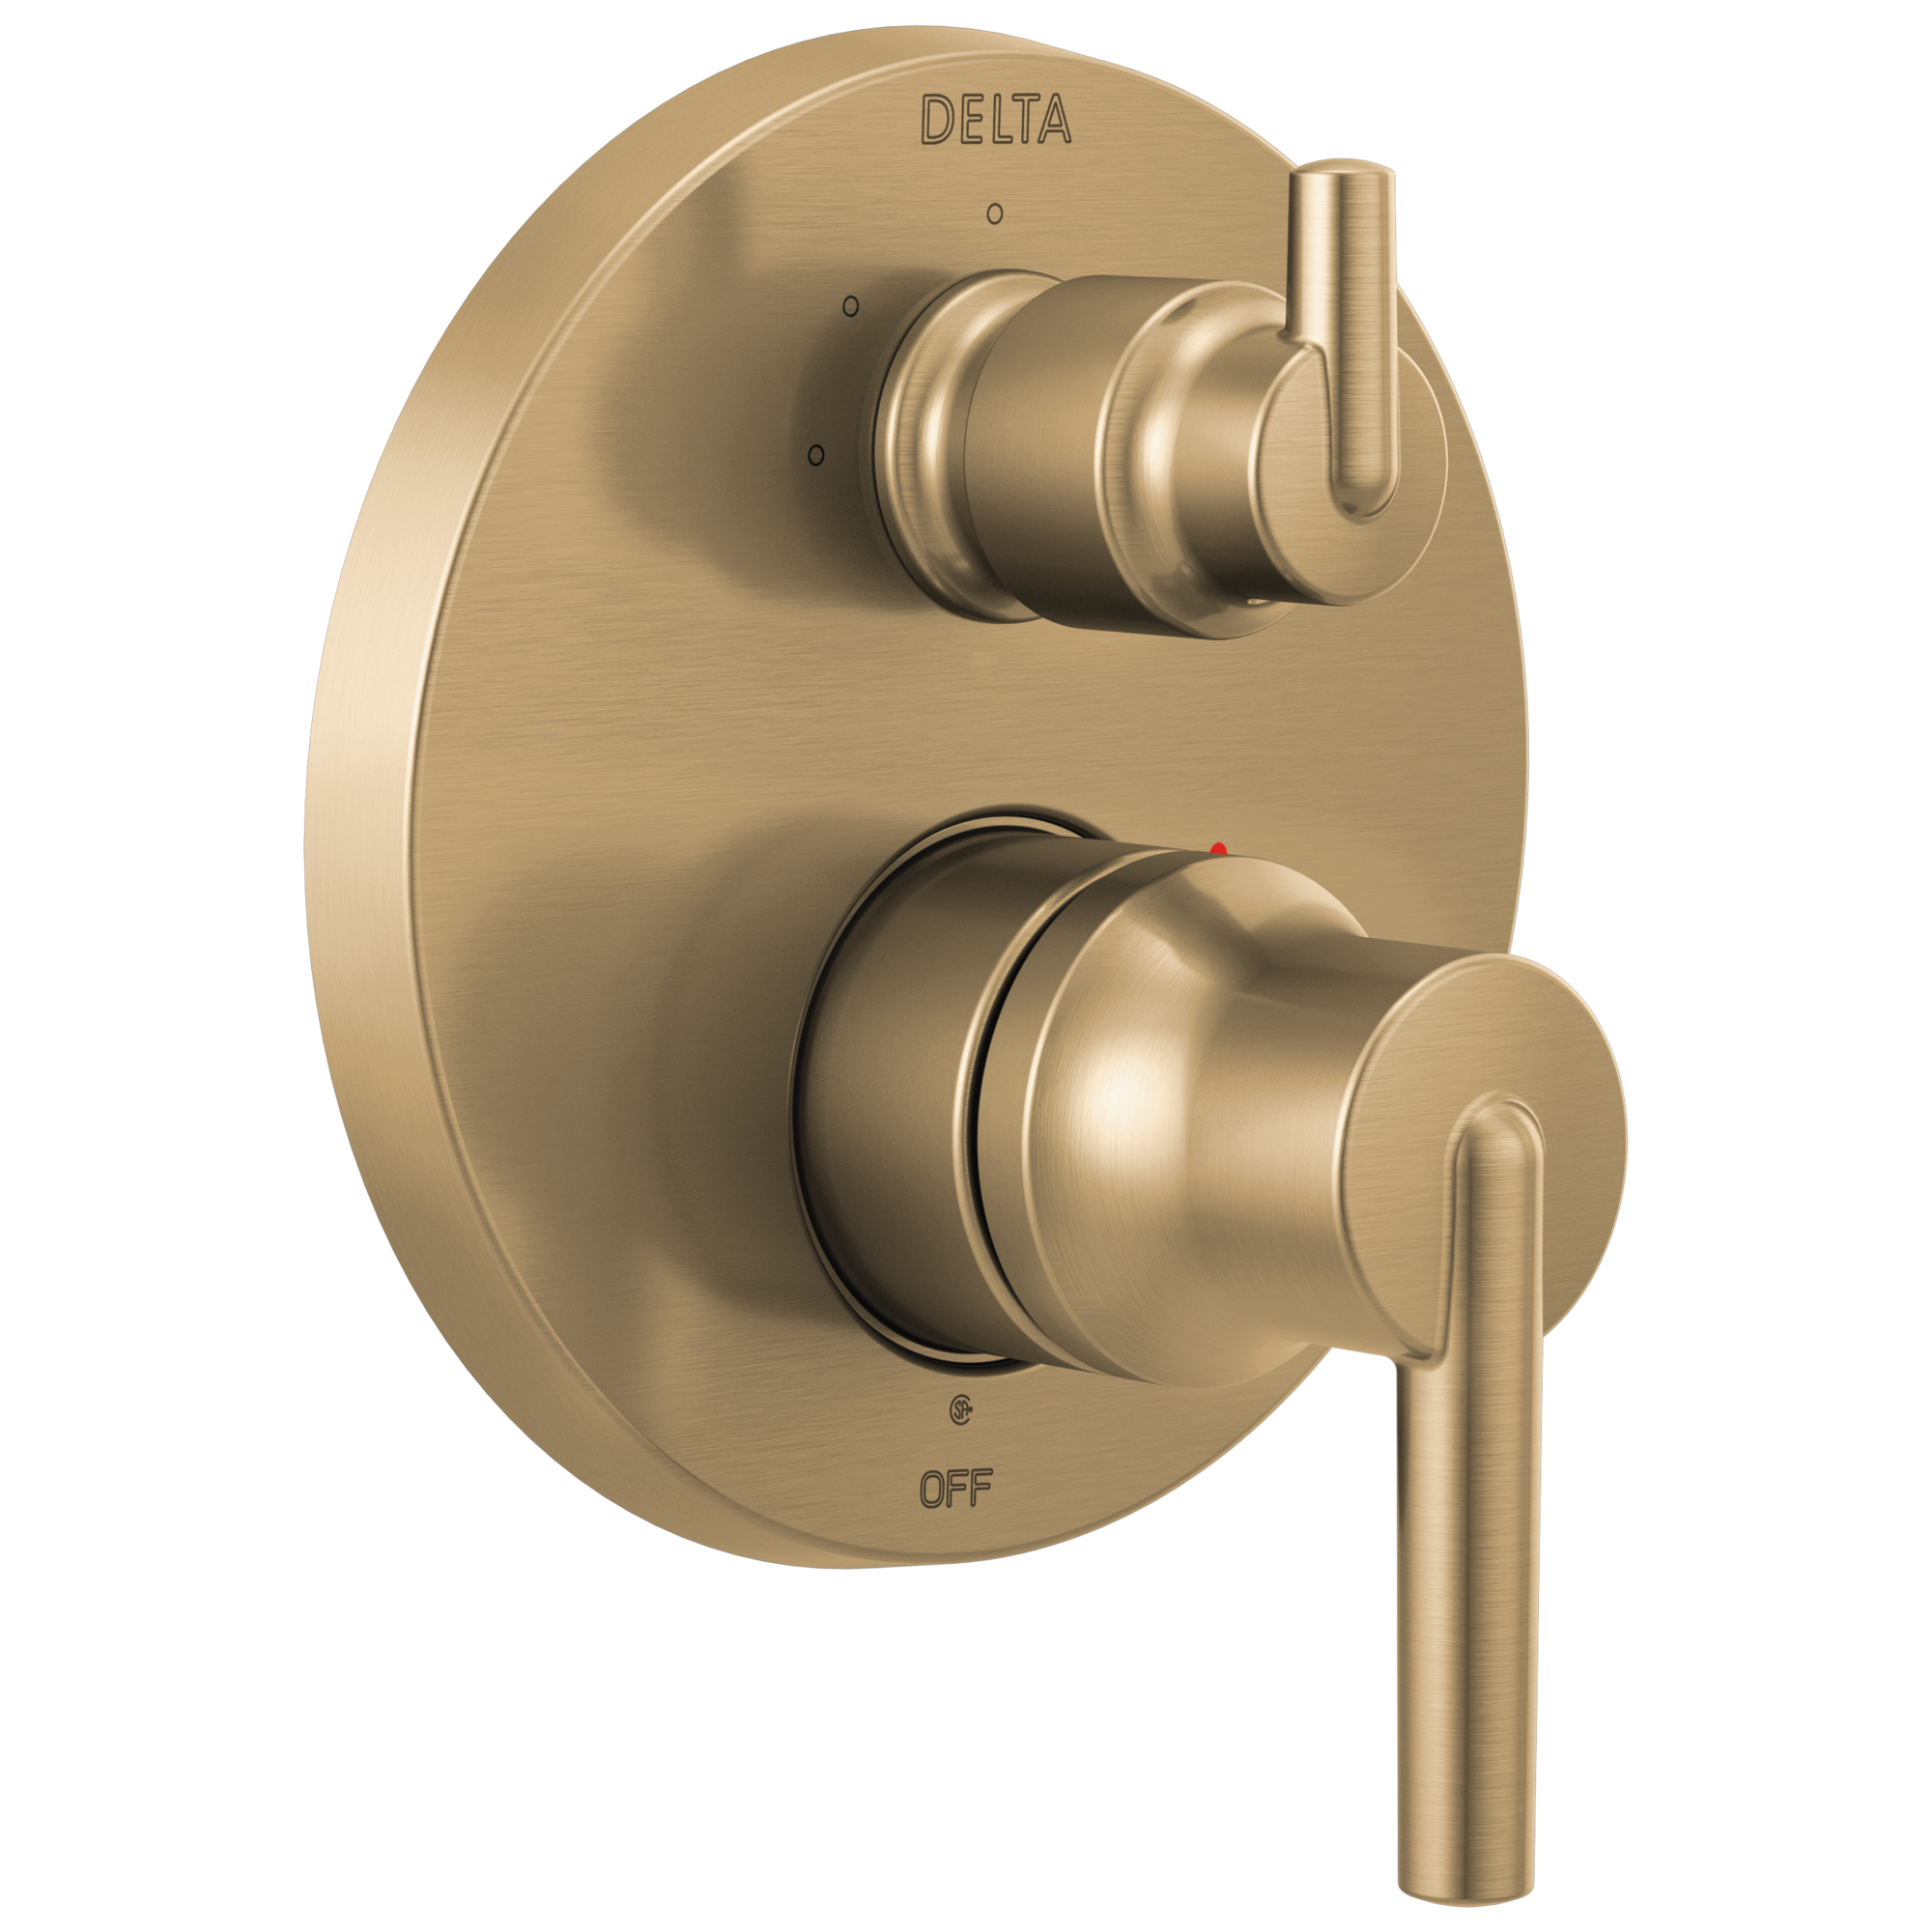 Delta Trinsic: Contemporary Monitor 14 Series Valve Trim with 3-Setting Integrated Diverter